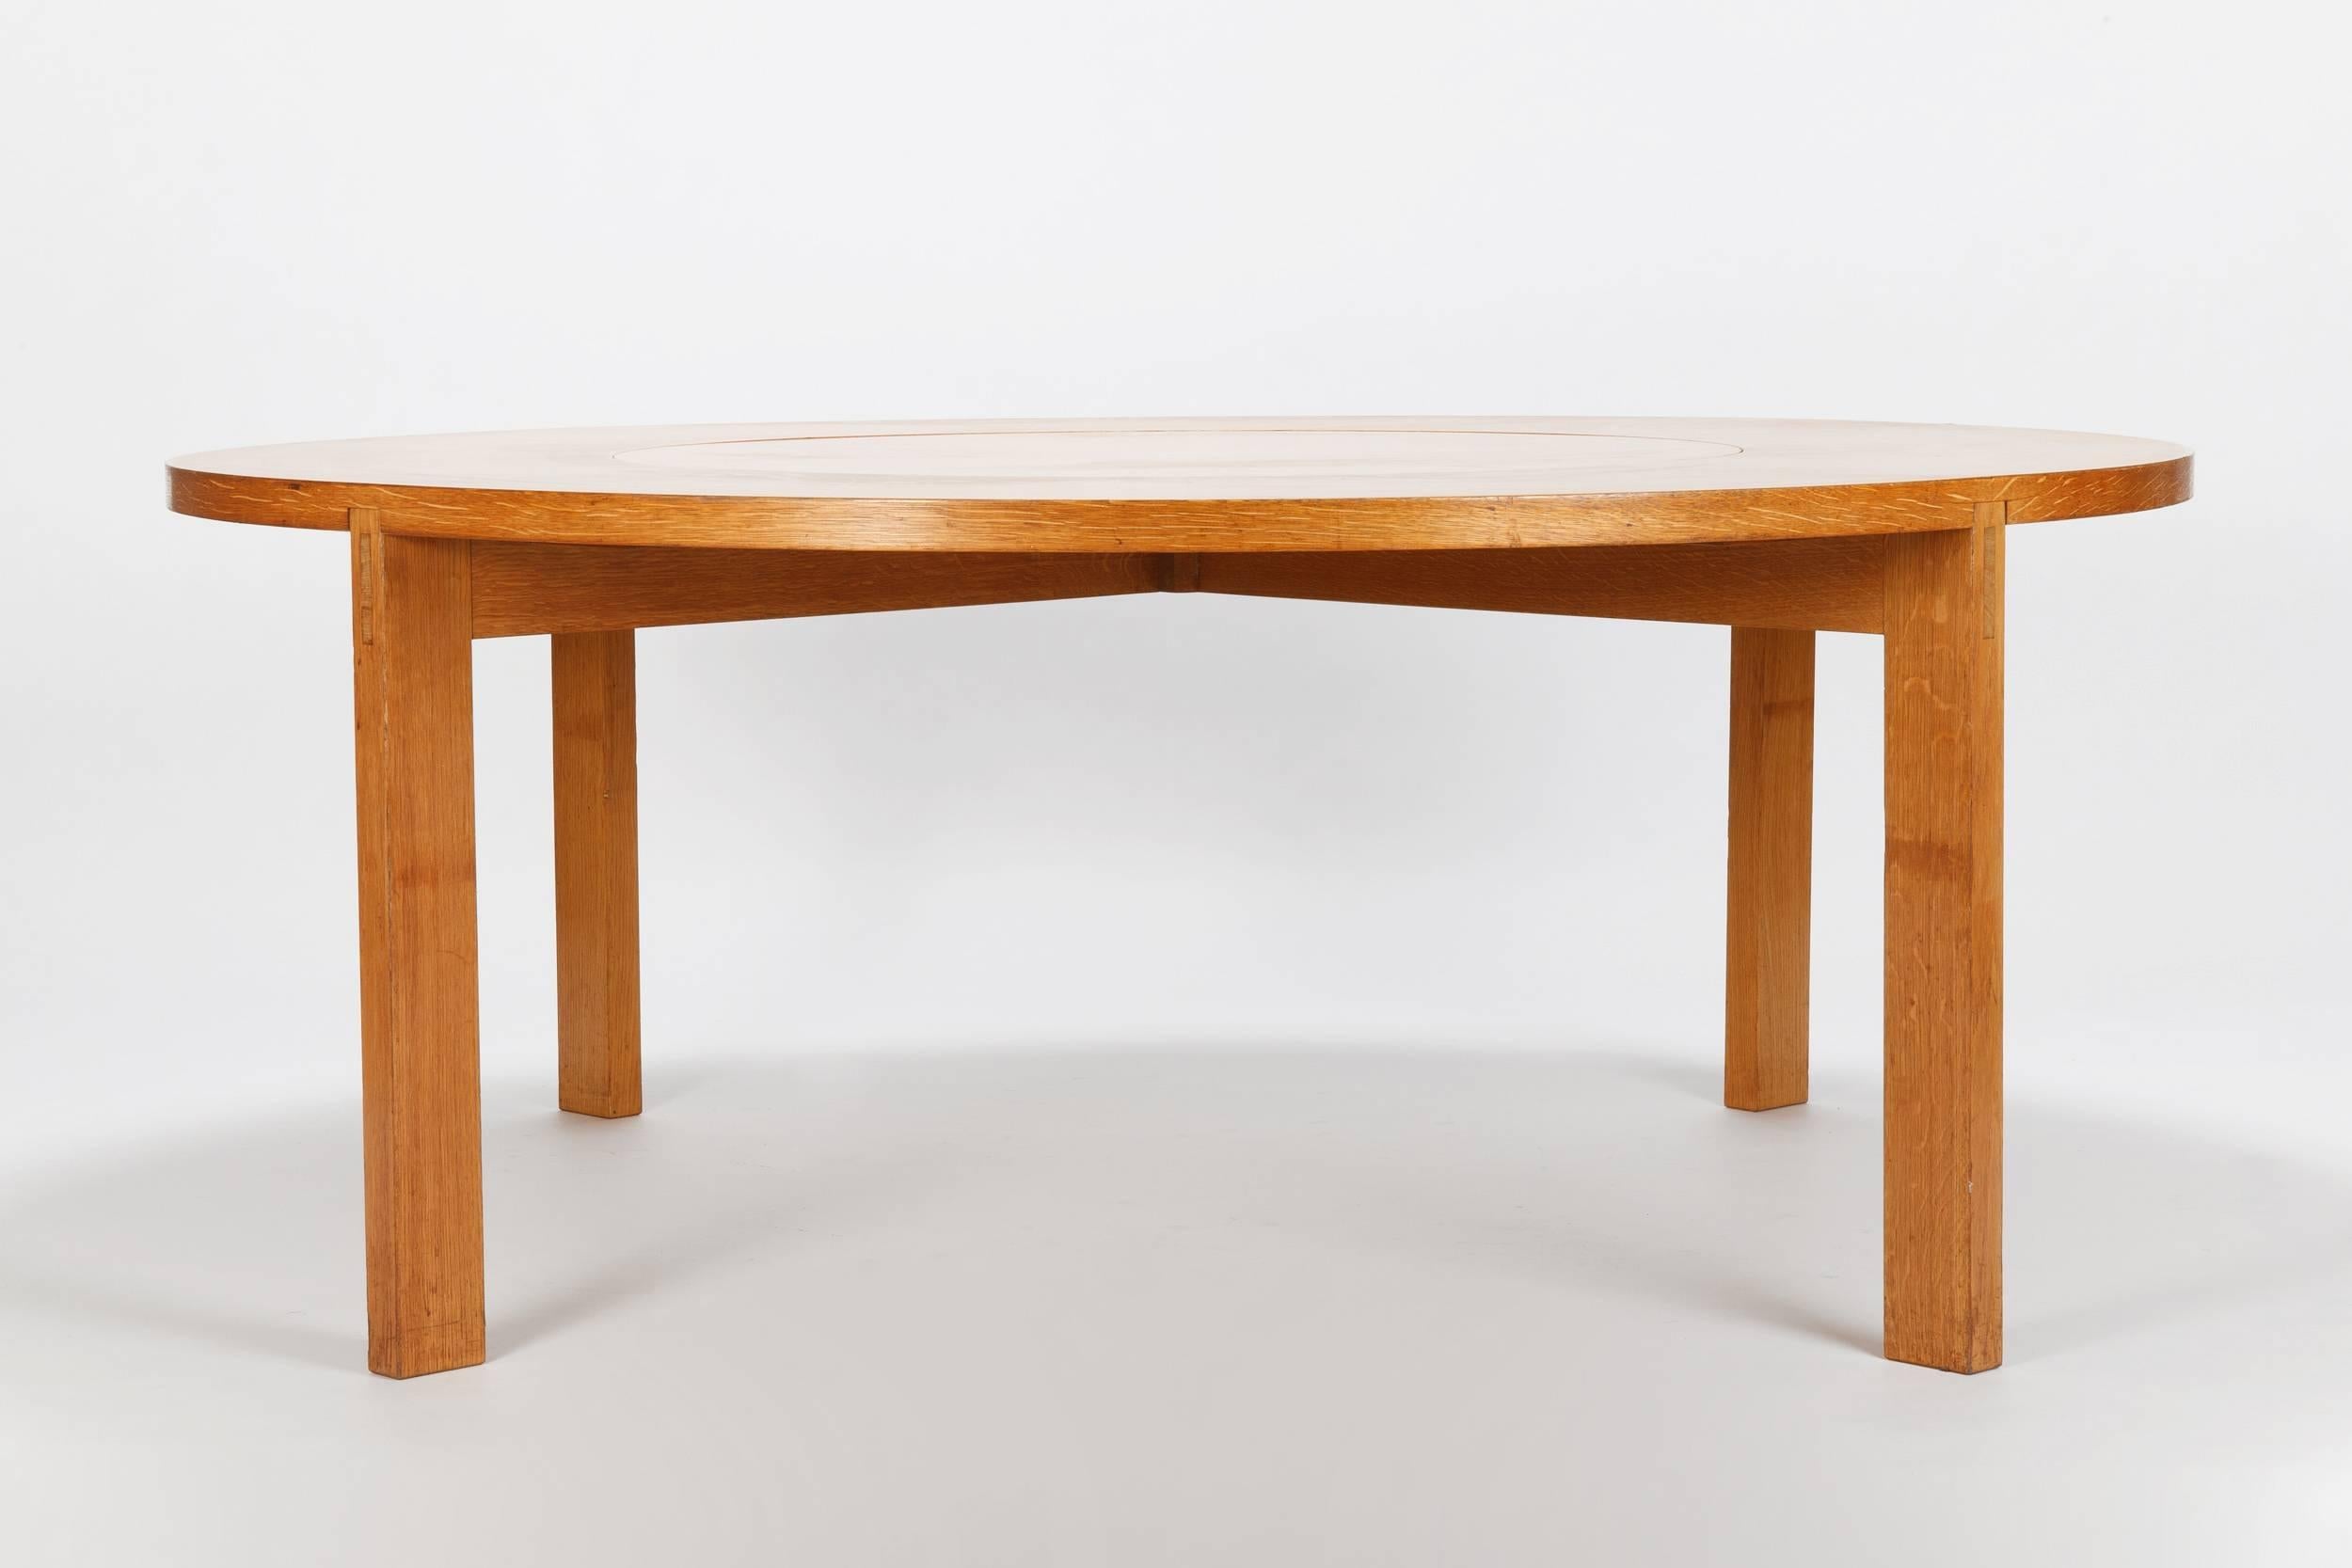 Huge and unique Werner Blaser dining table manufactured by Ernst Nielsen in the 1960s. The table is custom-made by Werner Blaser for the family Erni (brother of the famous artist). The base is made of solid oak and the tabletop is made of Japanese